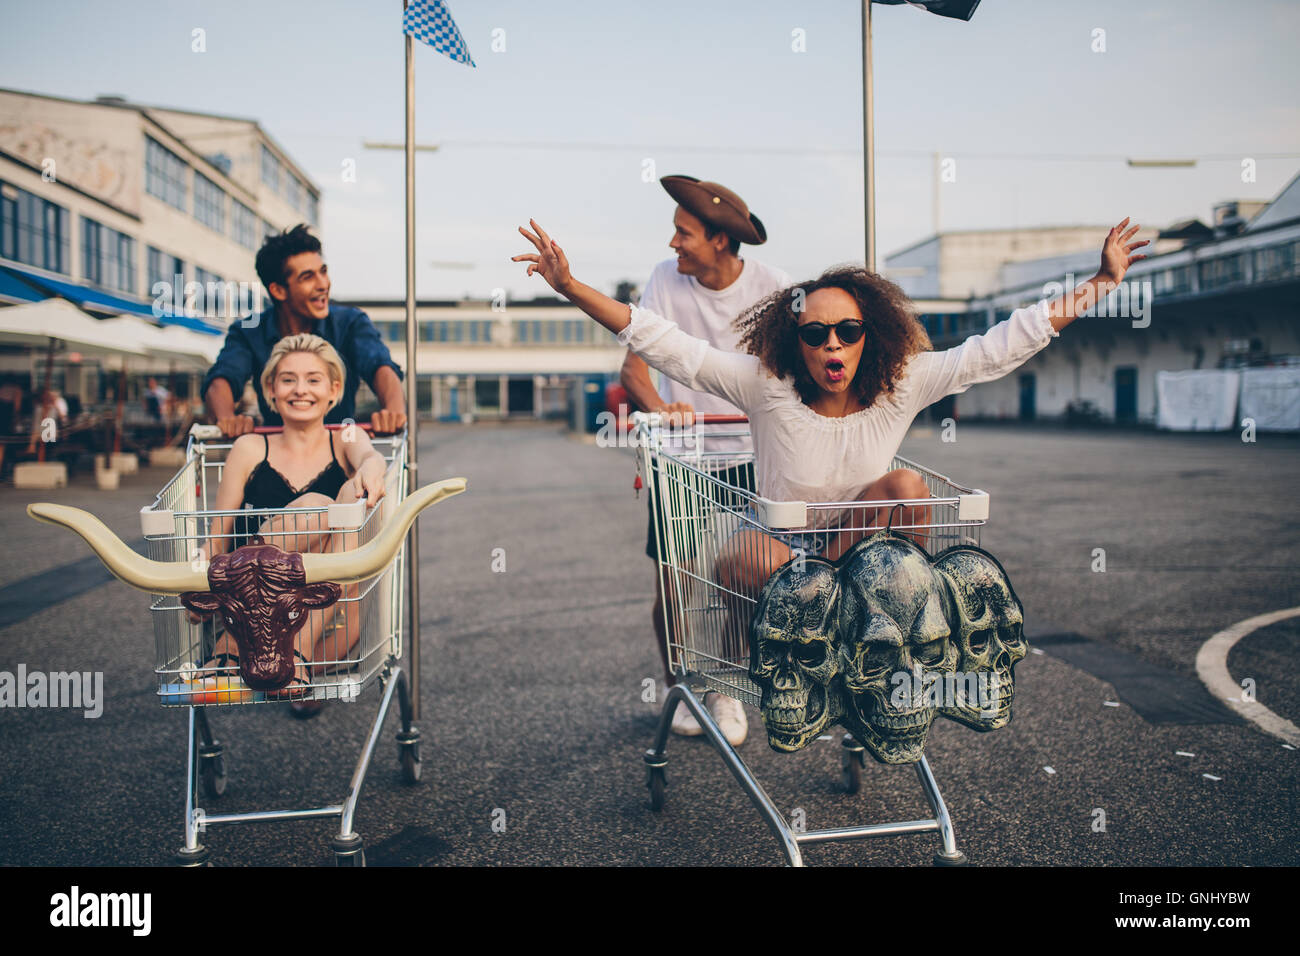 Young friends having fun on a shopping trolley. Multiethnic young people racing on shopping cart. Stock Photo